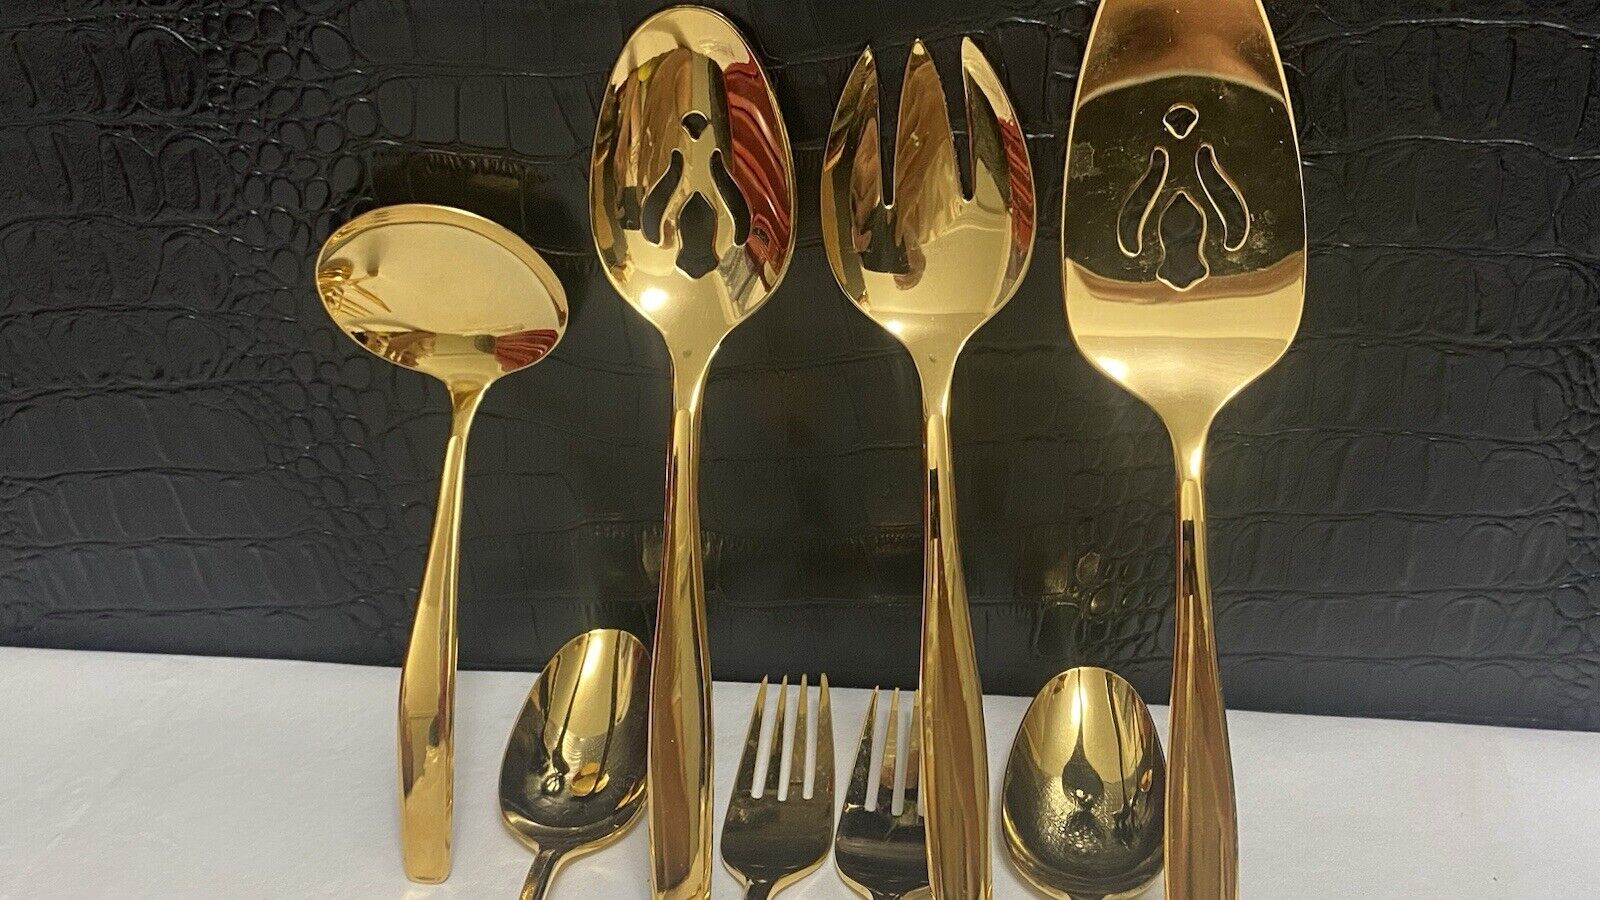 8 PC GOLDEN ( ROGERS CUTLERY & HORENTINE )  GOLD PLATED SERVING PIECES Stainless